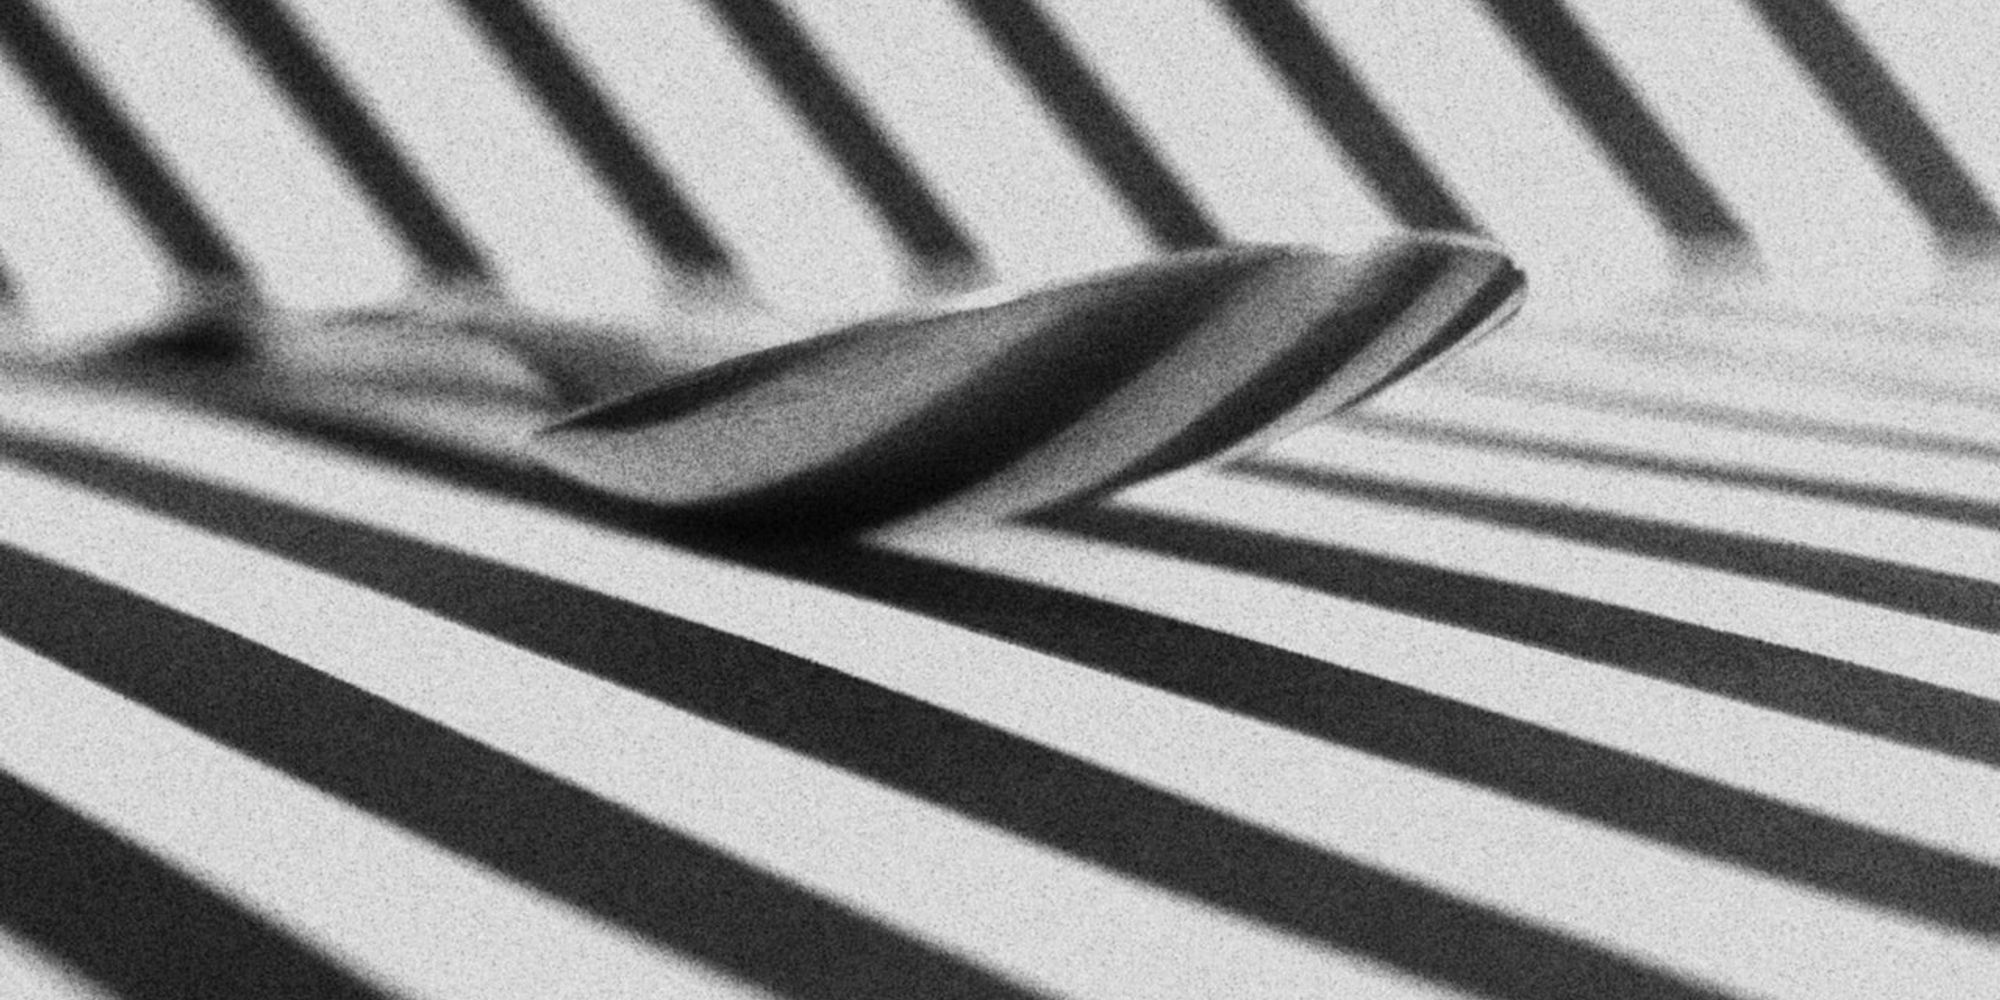 Spoon On A Surface With Black And White Stripes 3383956